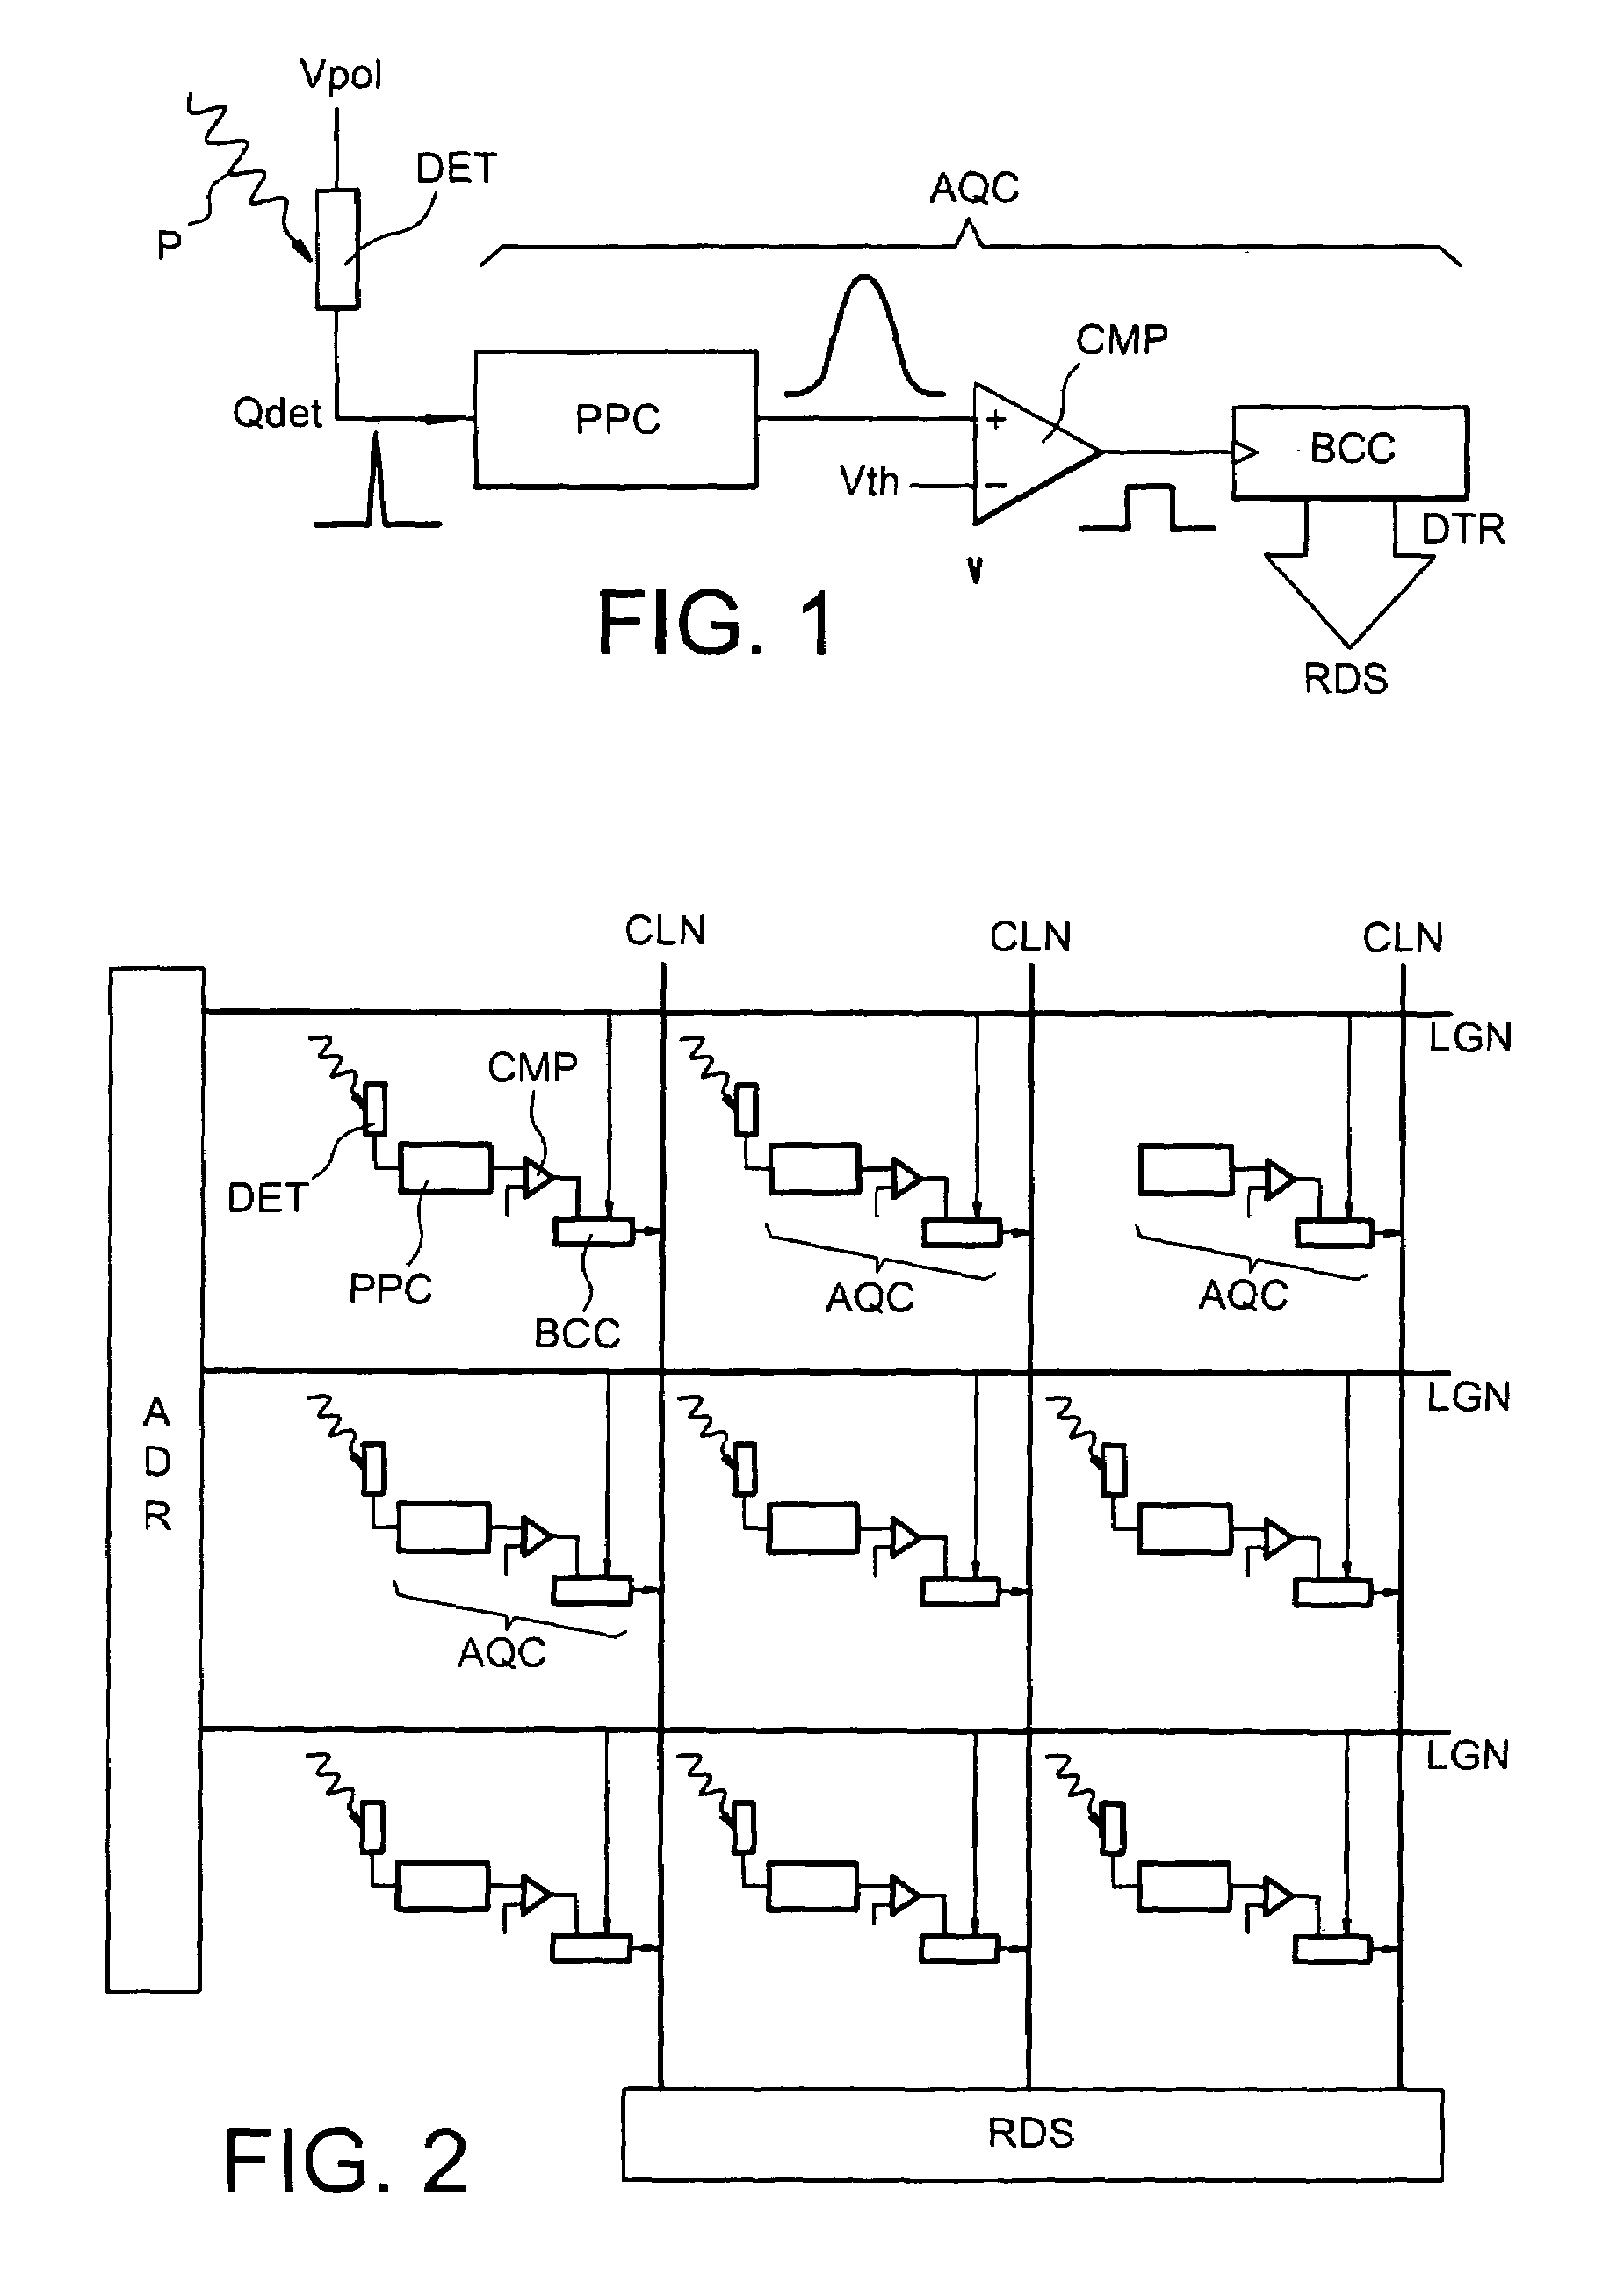 Radiation detecting system with double resetting pulse count